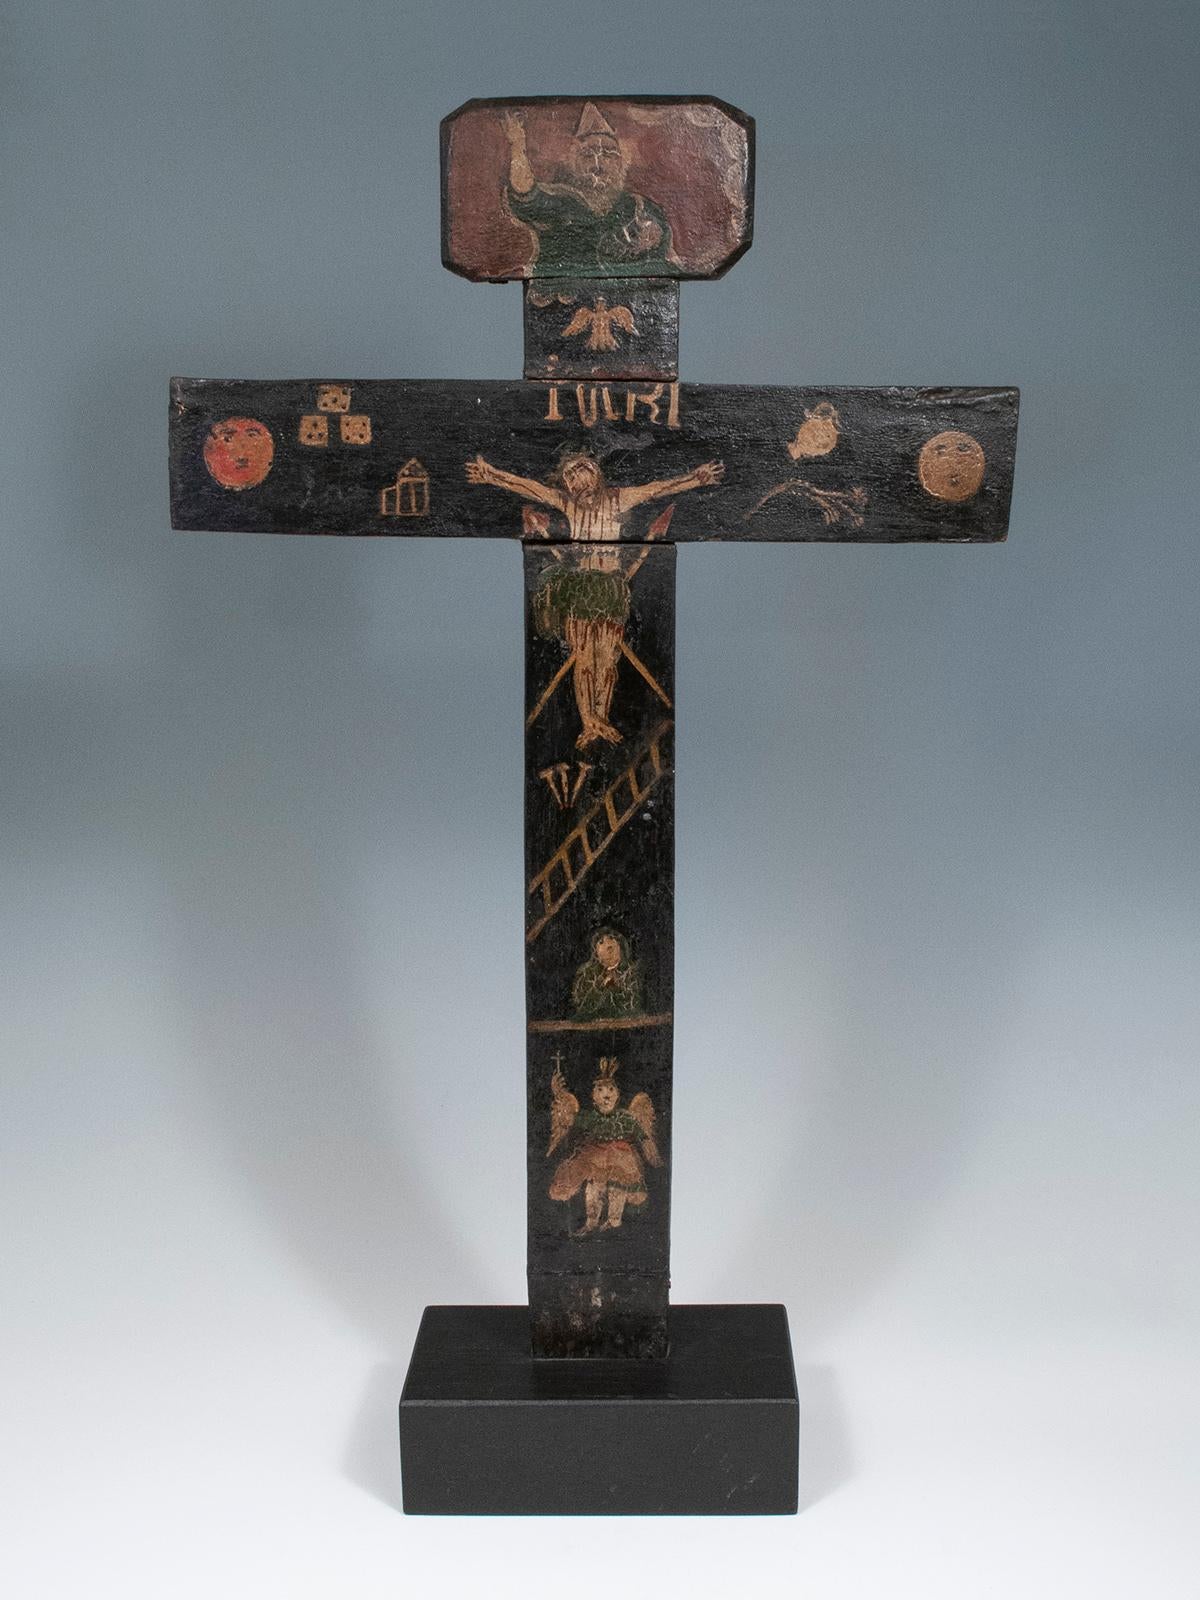 Wooden cross
Guanajuato, Mexico
Wood, paint
22 x 13 inches, (56 cm x 33 cm)
18th century

A wonderful old wooden cross with a painted crucified Christ figure, an angel, possibly Mary Magdelene, God and the Holy Spirit, and various items